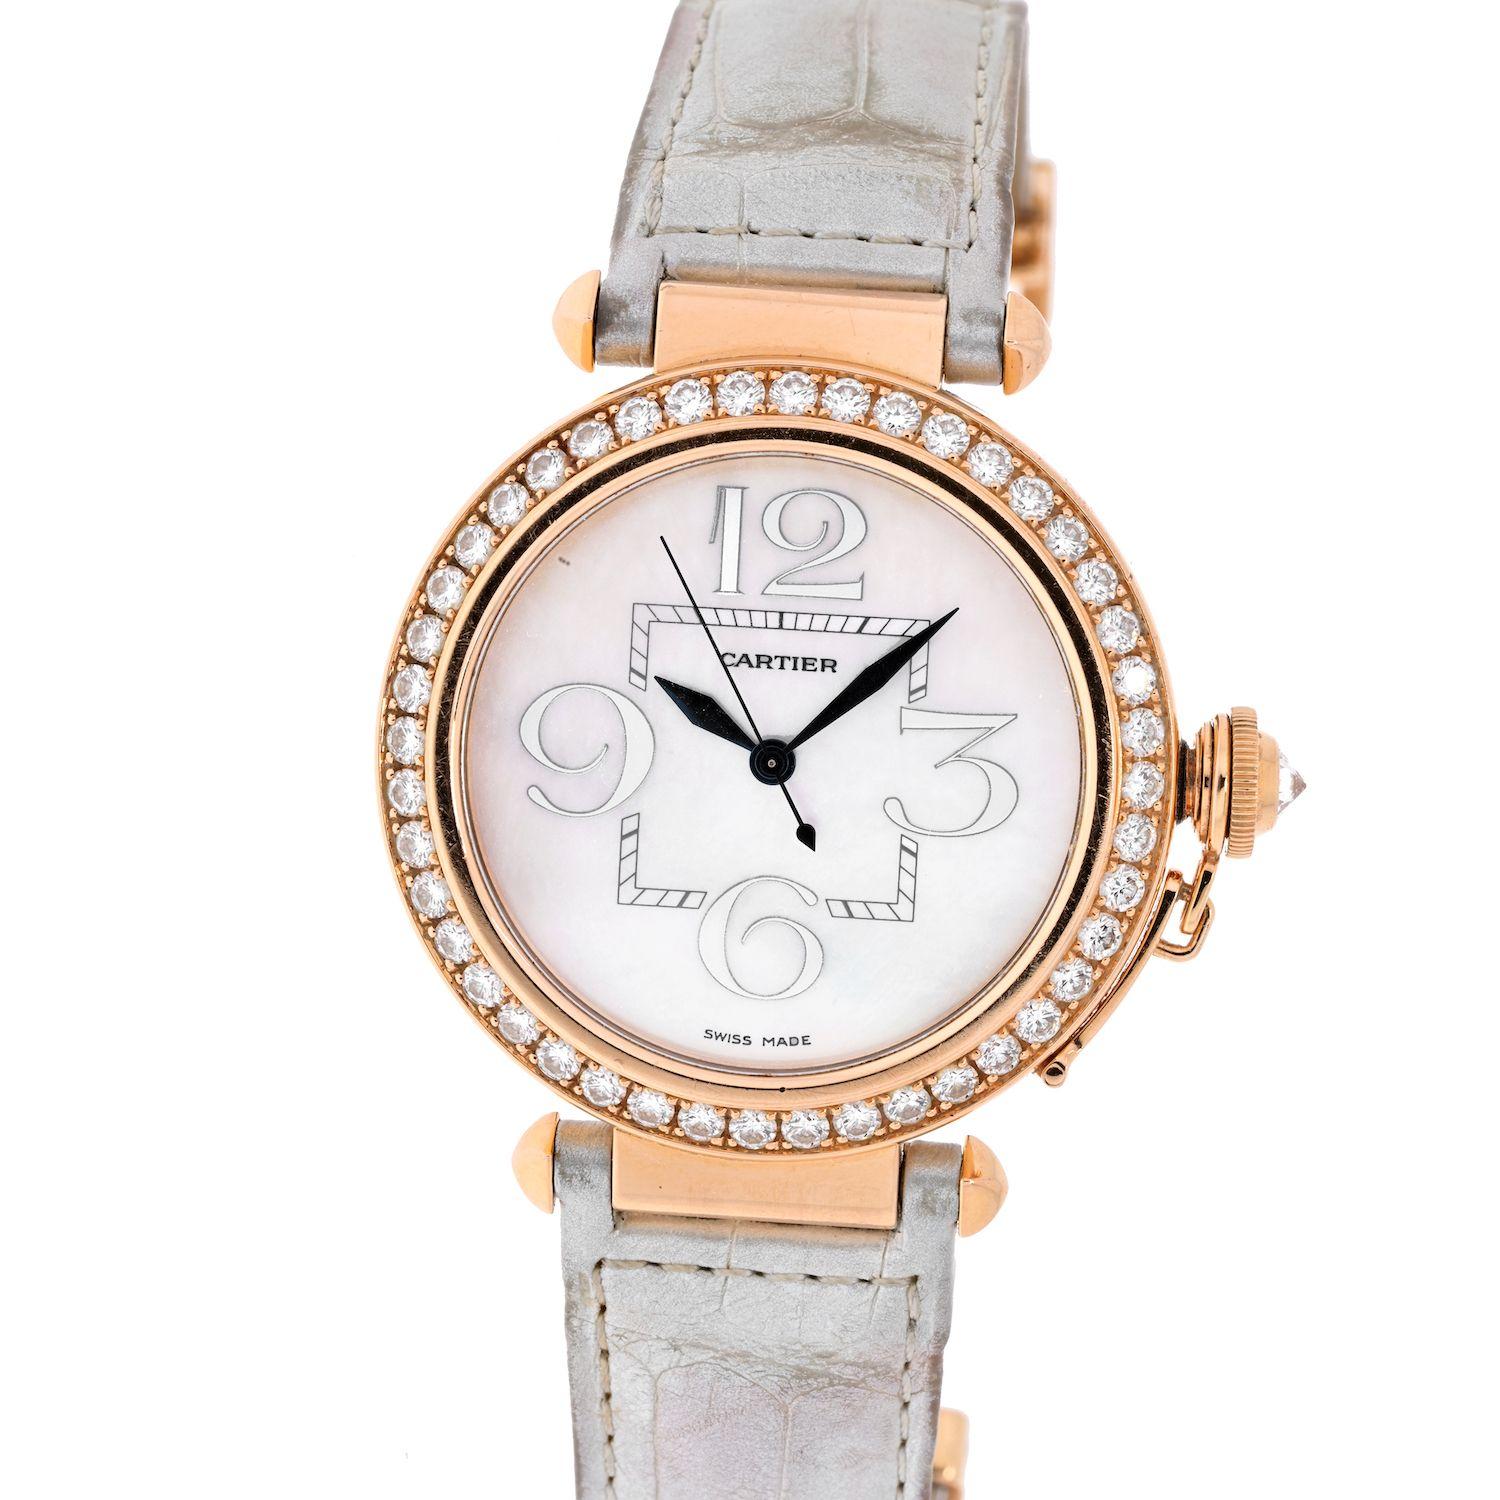 Cartier Pasha 18K Rose Gold Ladies Diamond Round White Dial 42mm Ladies Watch on a white leather strap. 
This watch is pre-owned but works perfect. Diamonds on the bezel are al loriginal. Crystal and sapphire show no signs of wear. 
Dial measures